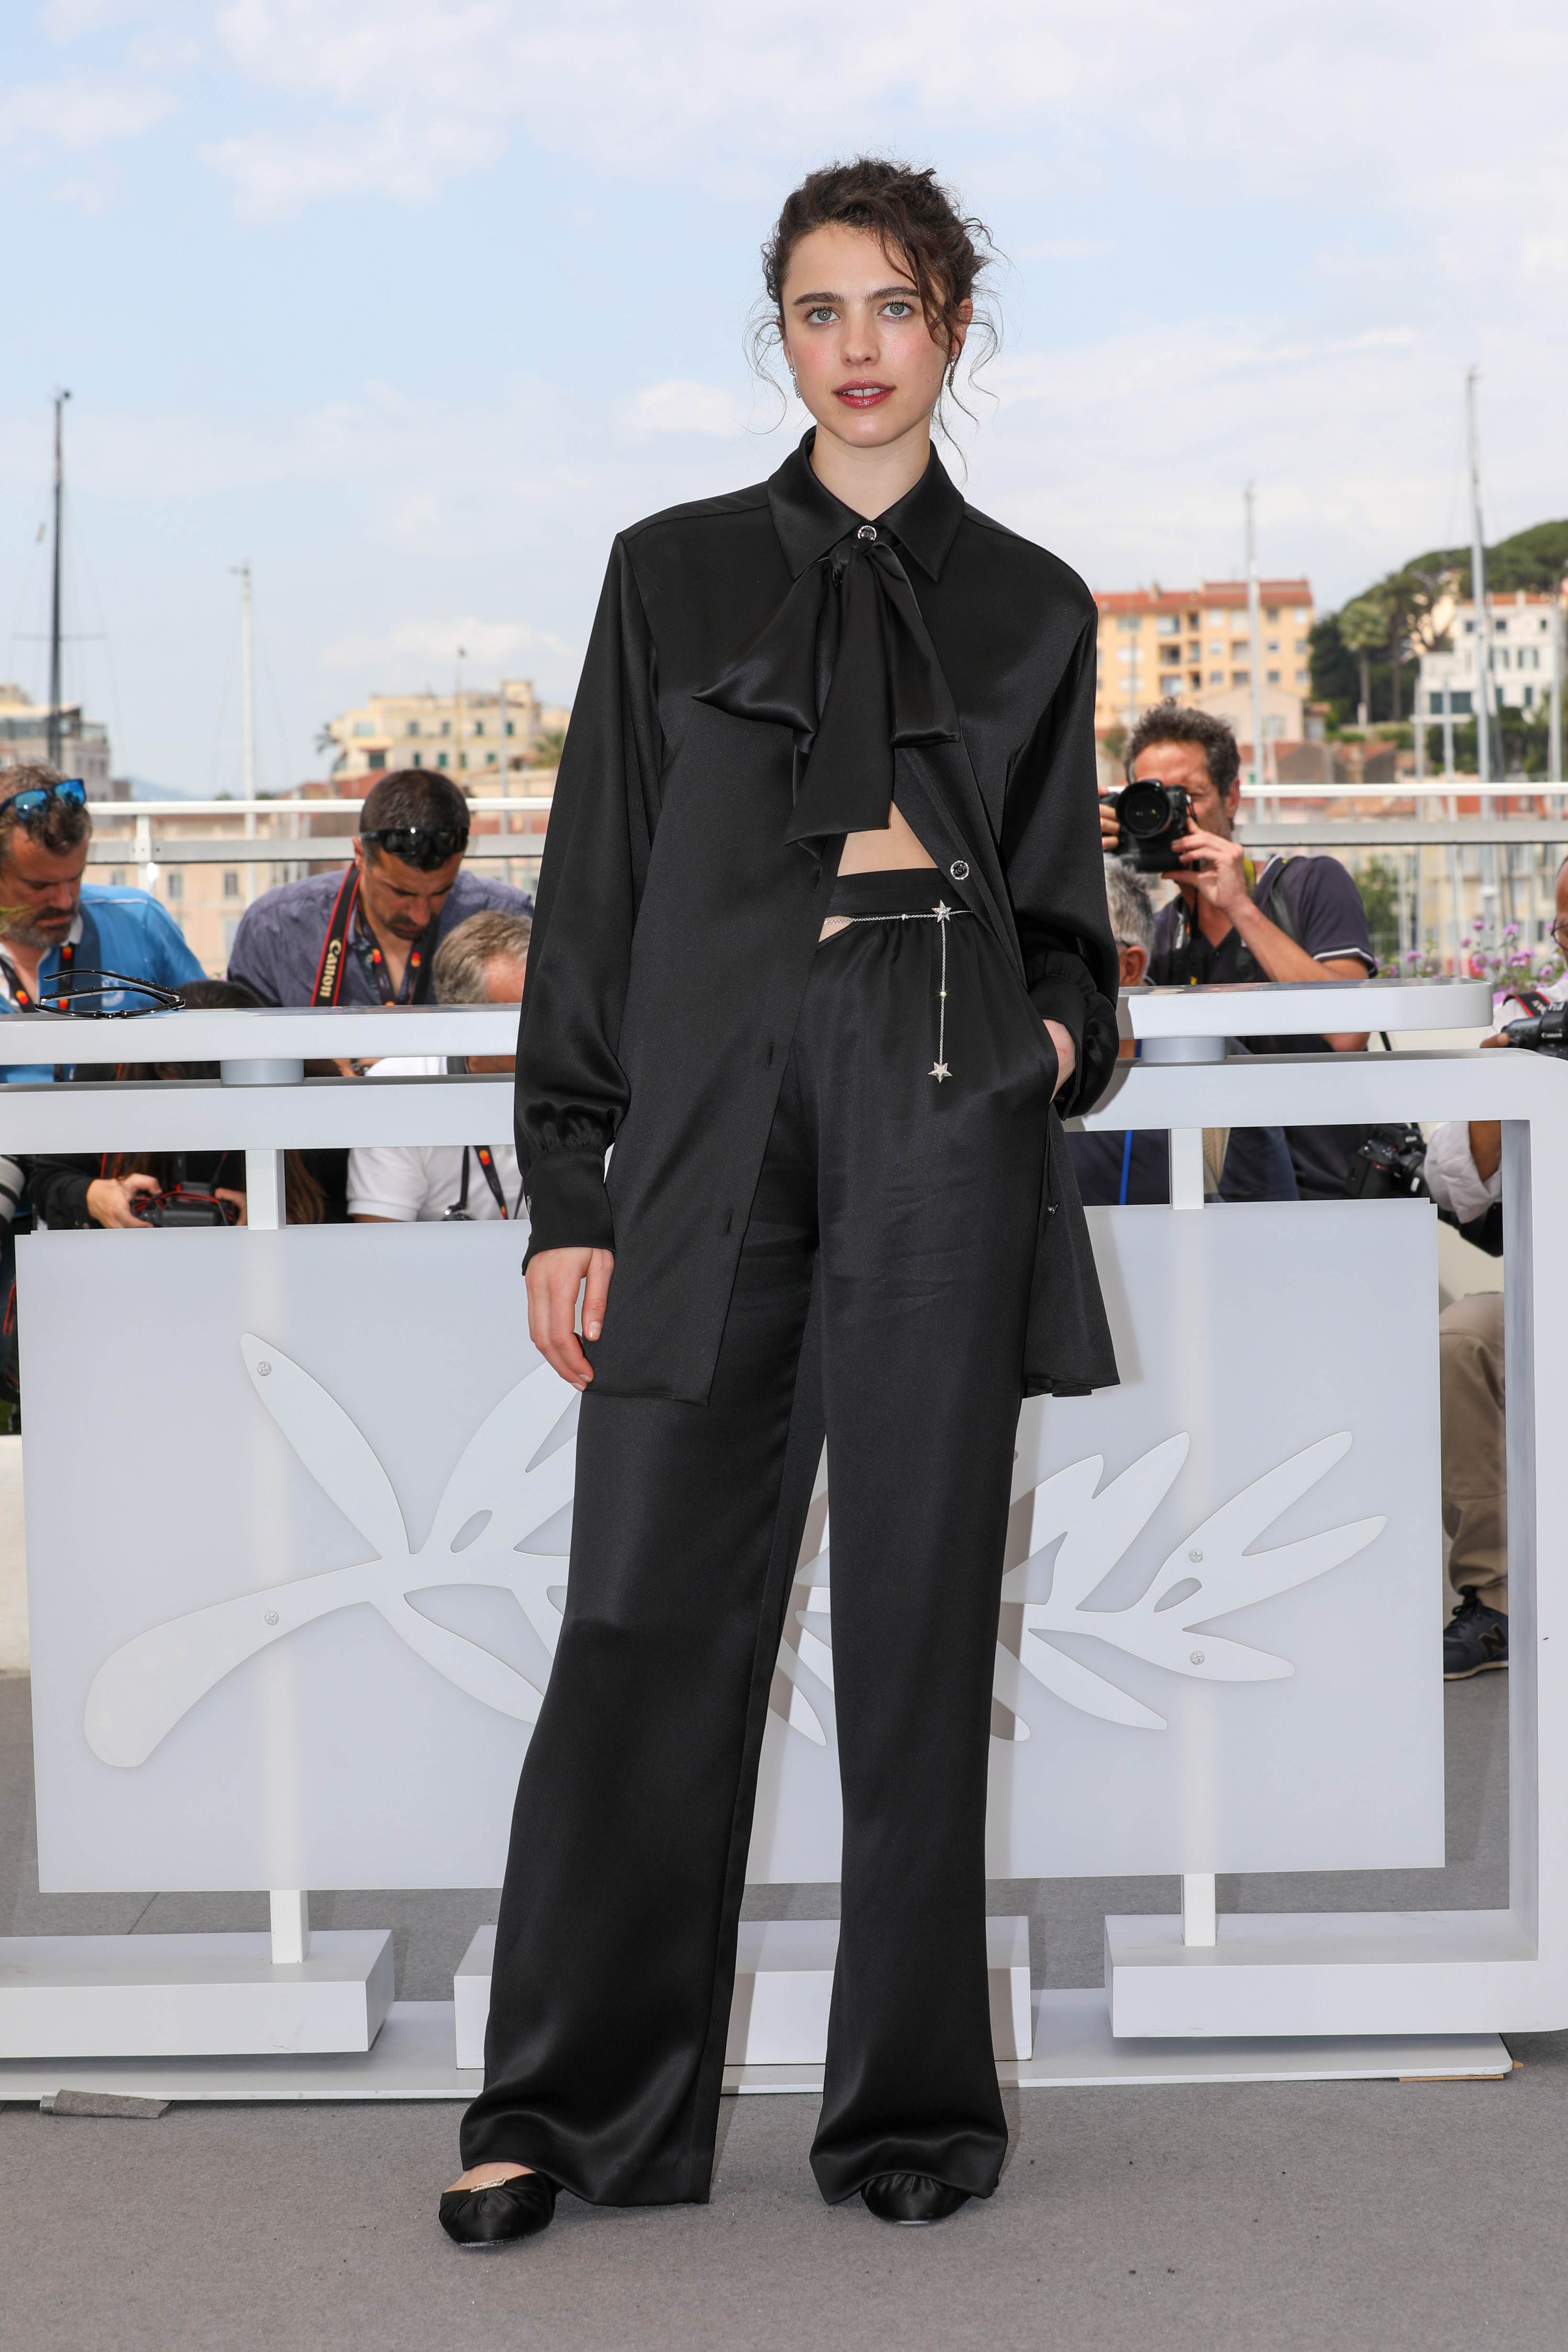 Margaret Qualley Continues Her Chanel Reign At Cannes Film Festival